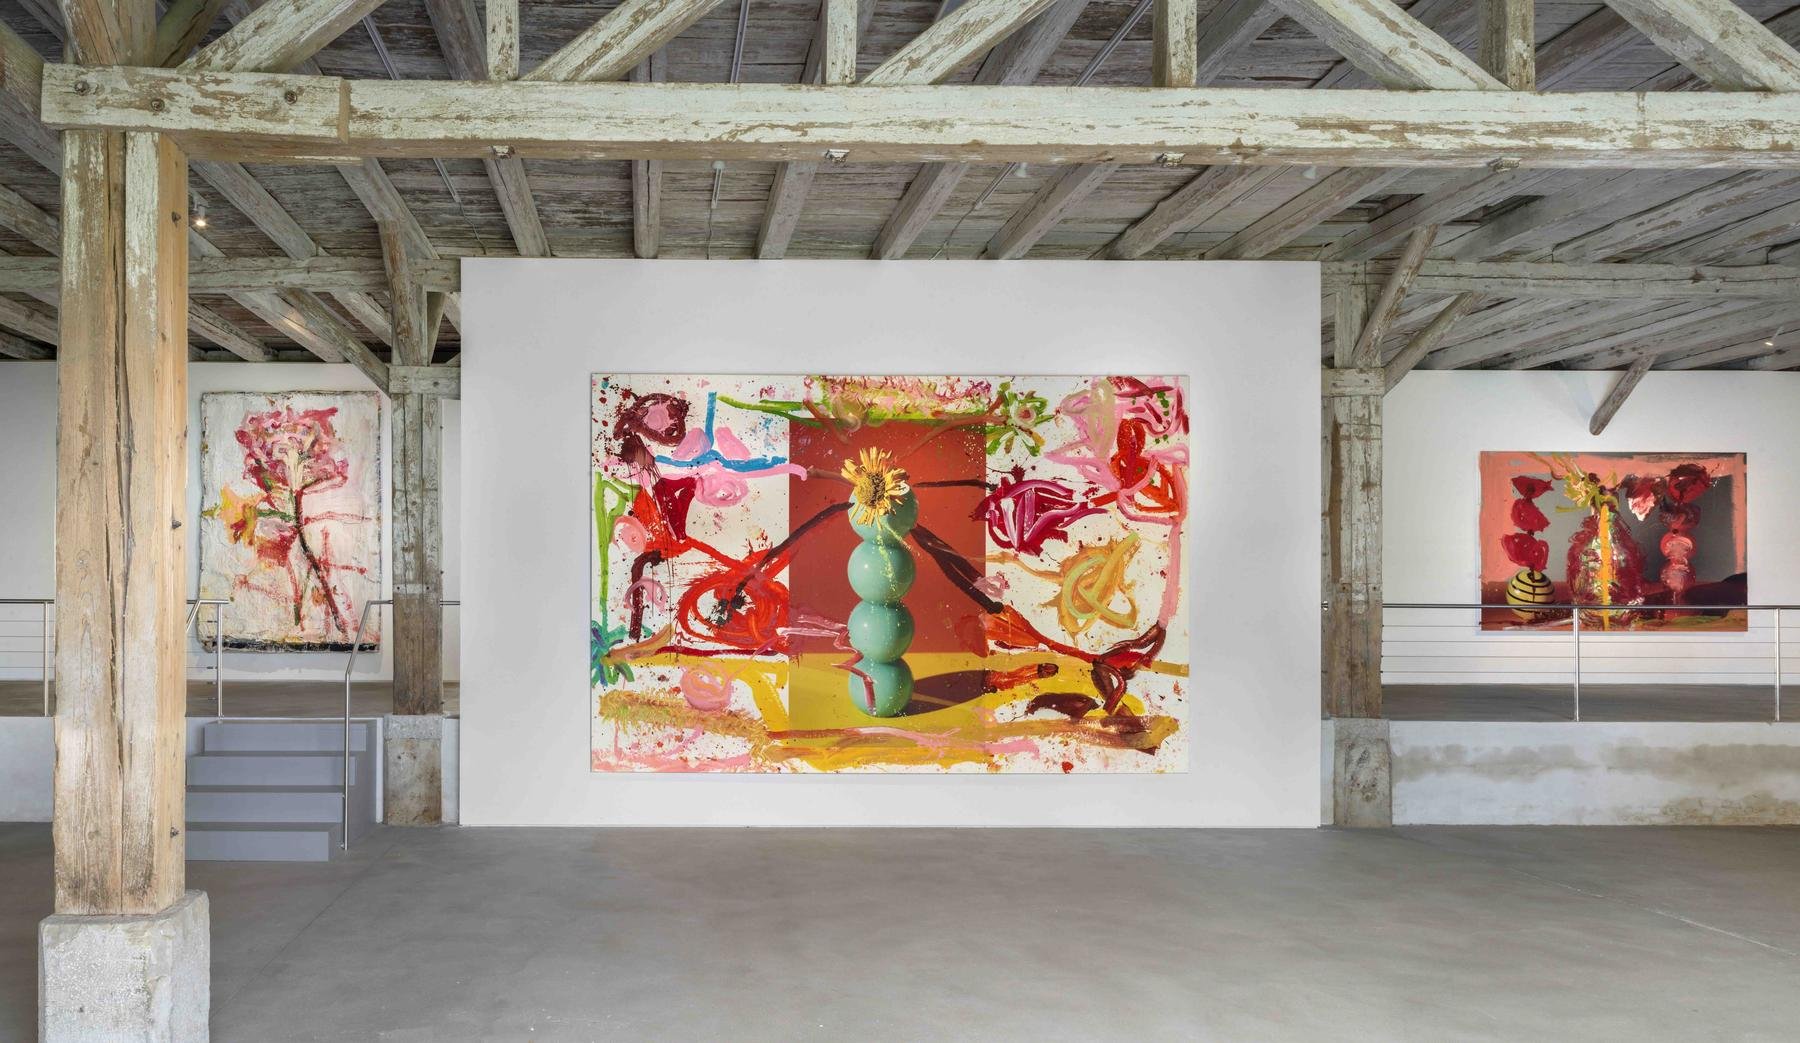  Installation view:  Flower Paintings,  in collaboration with Pedro Almodóvar, Hall Art Foundation, Kunstmuseum Schloss Derneburg, Germany (2021-22) 